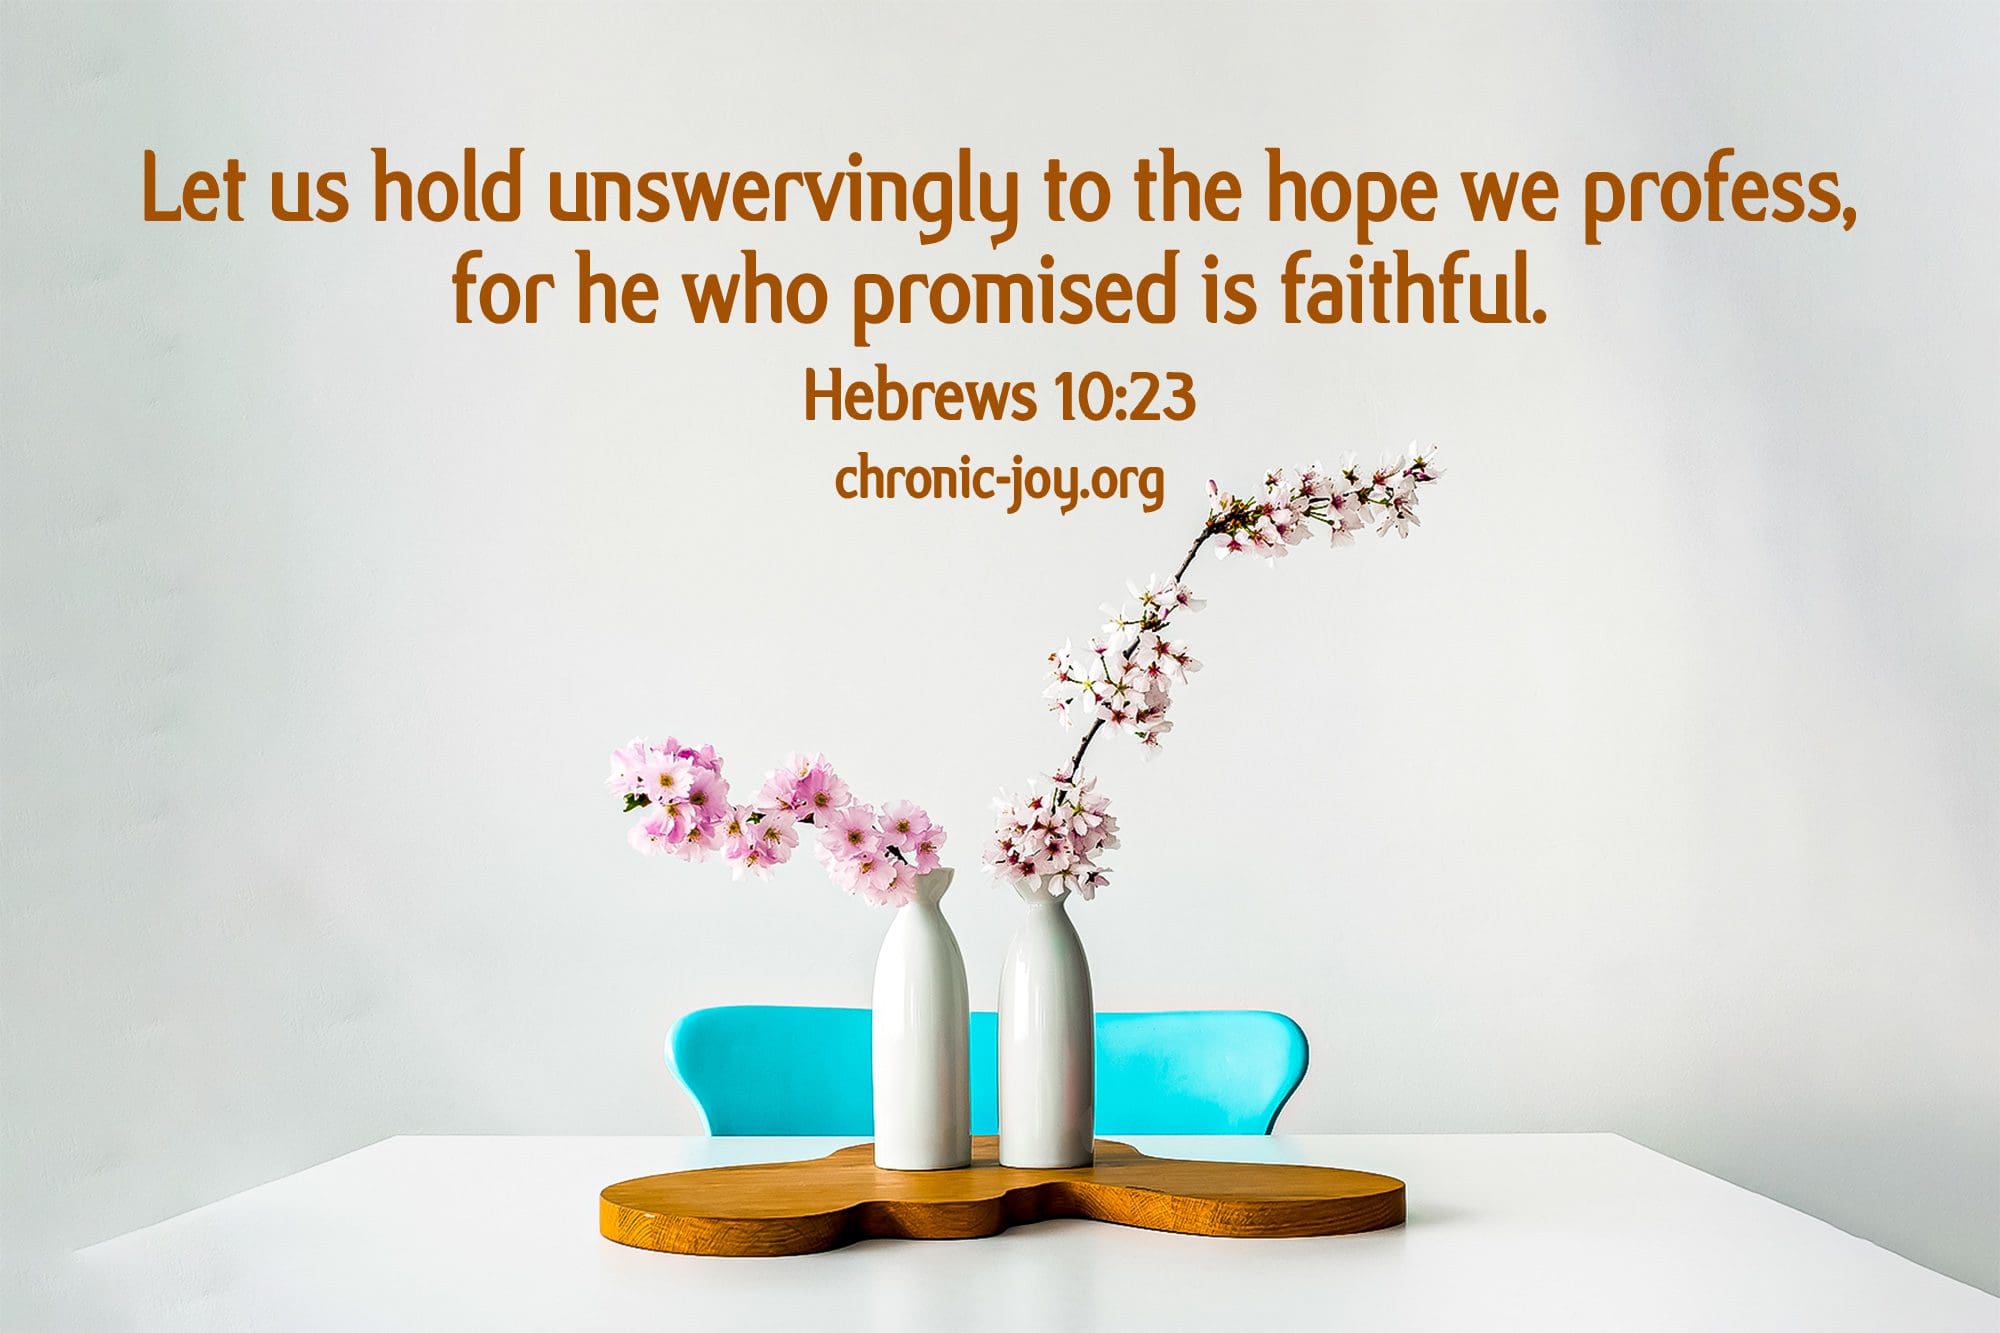 "Let us hold unswervingly to the hope we profess, for he who promised is faithful." Hebrews 10:23